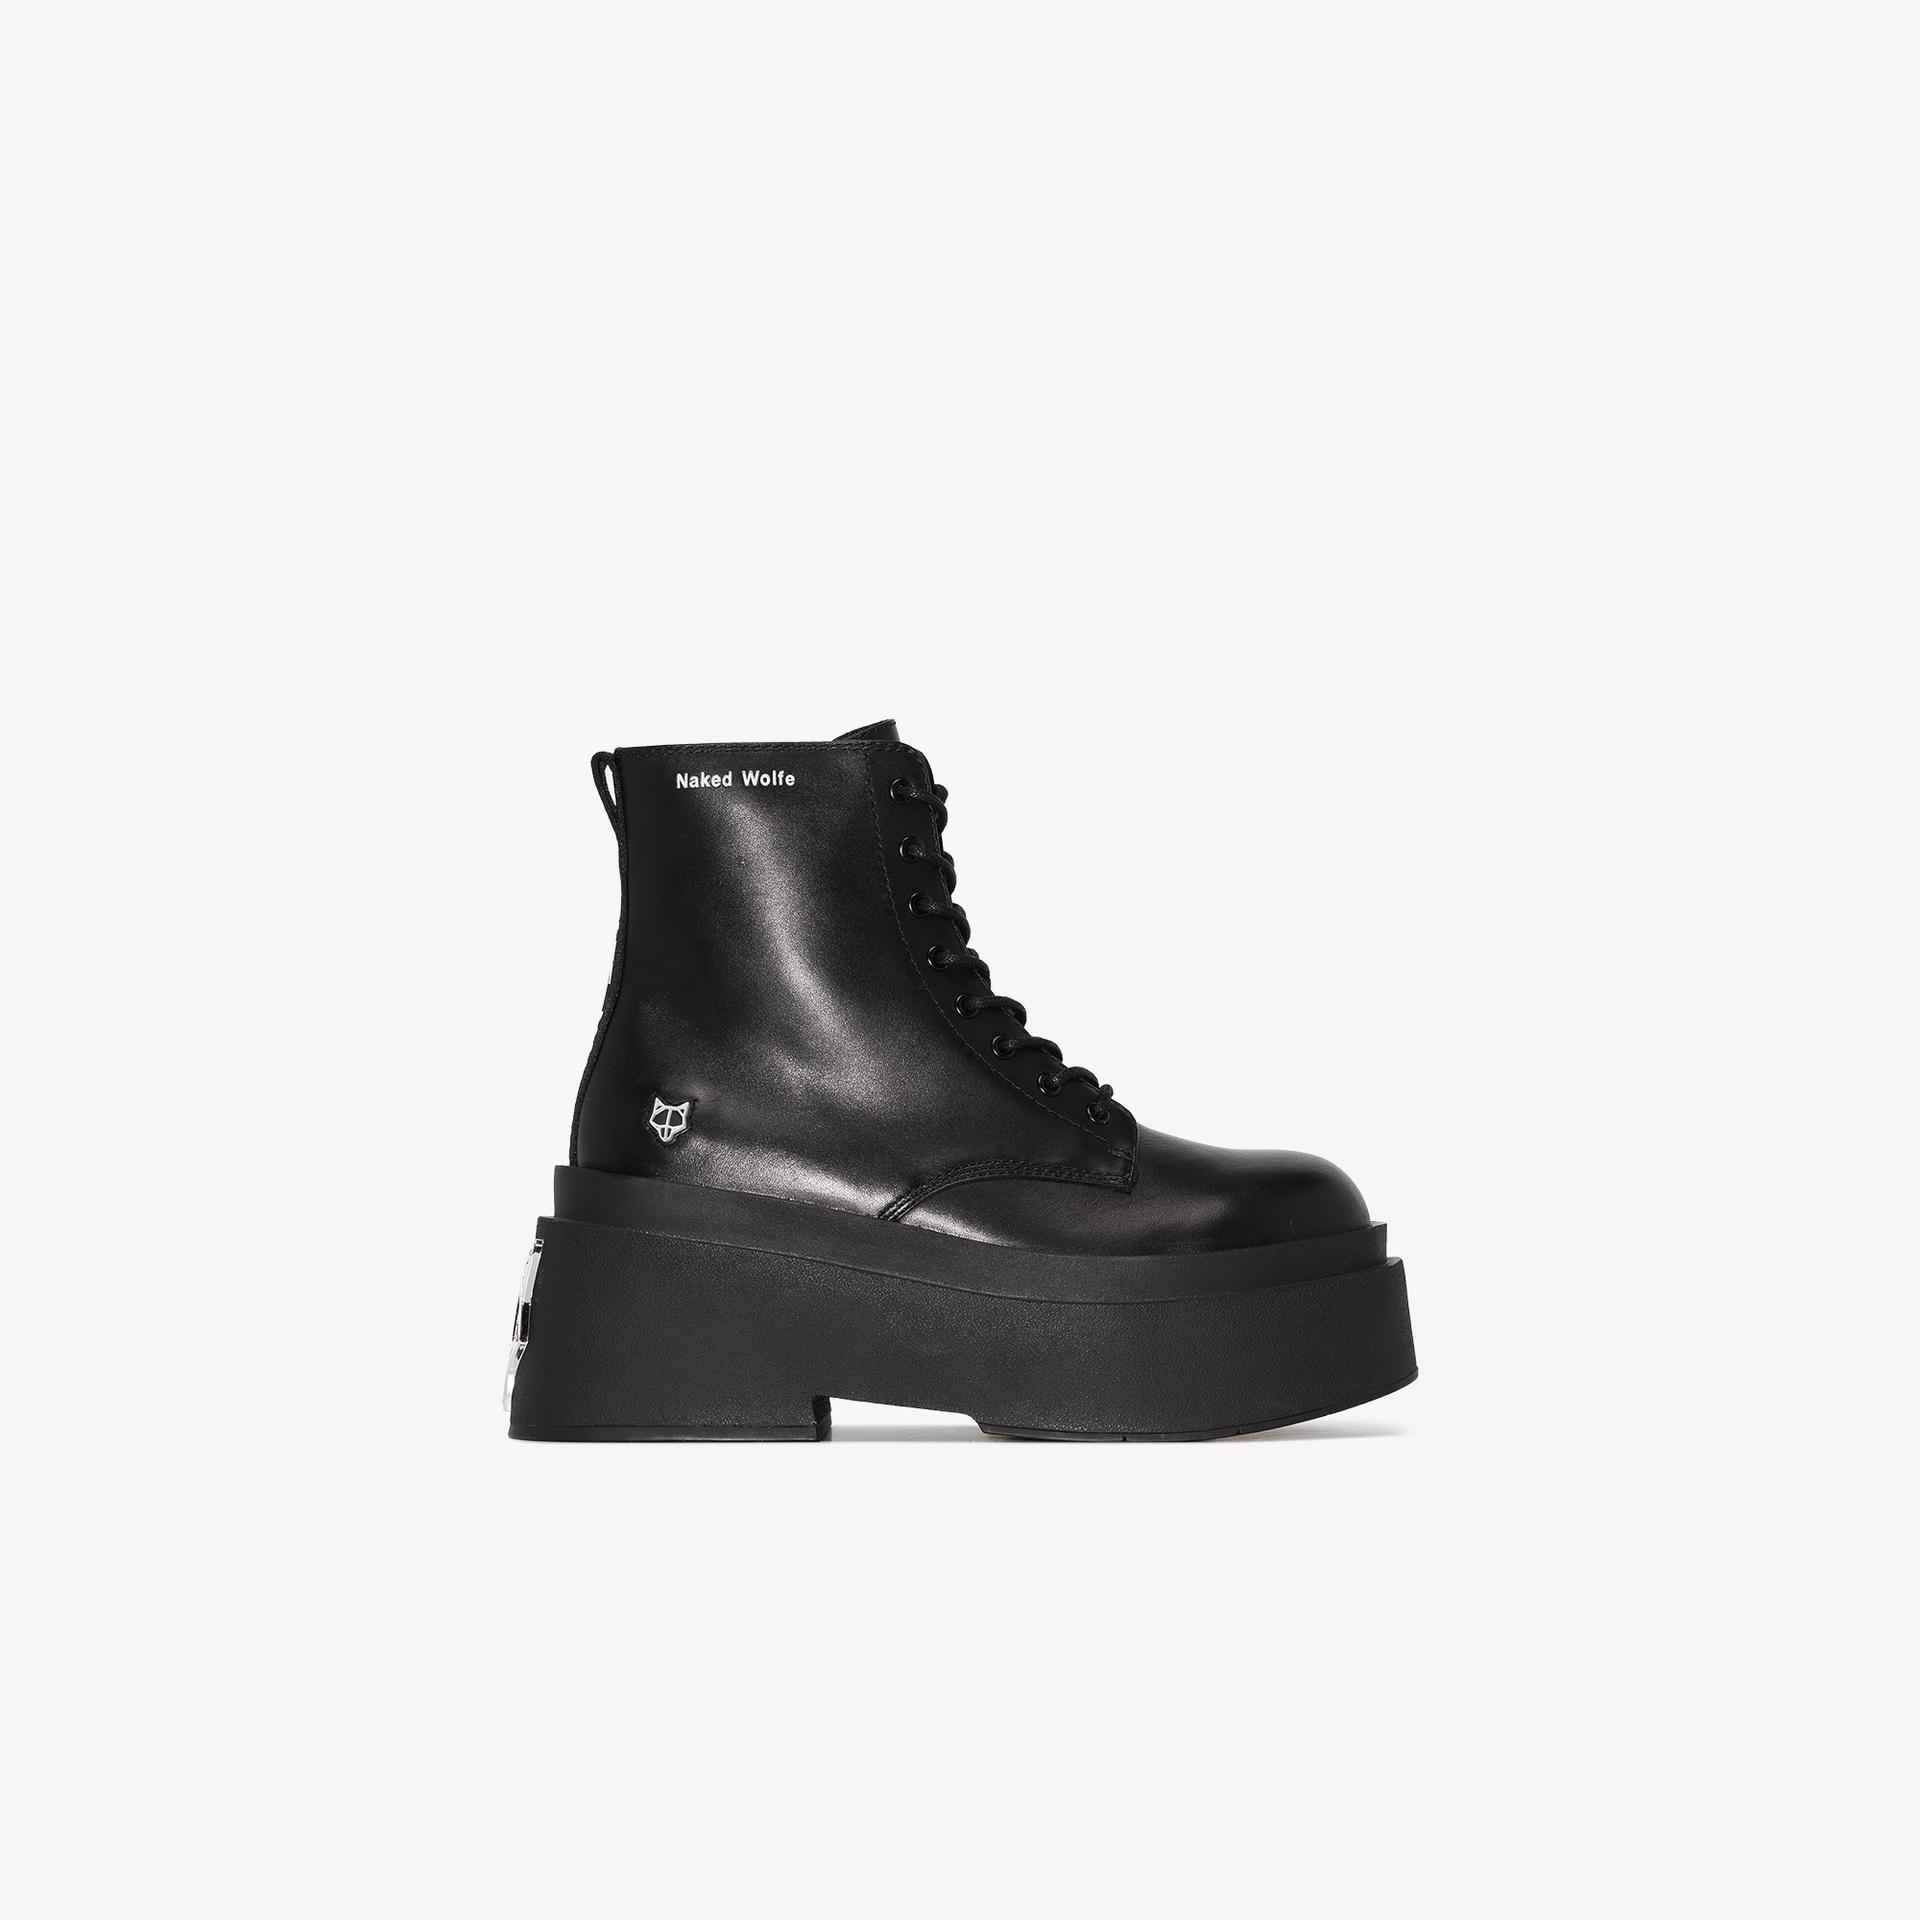 Naked Wolfe Saturn 160 Platform Leather Boots - Women's -  Fabric/rubber/leather in Black | Lyst